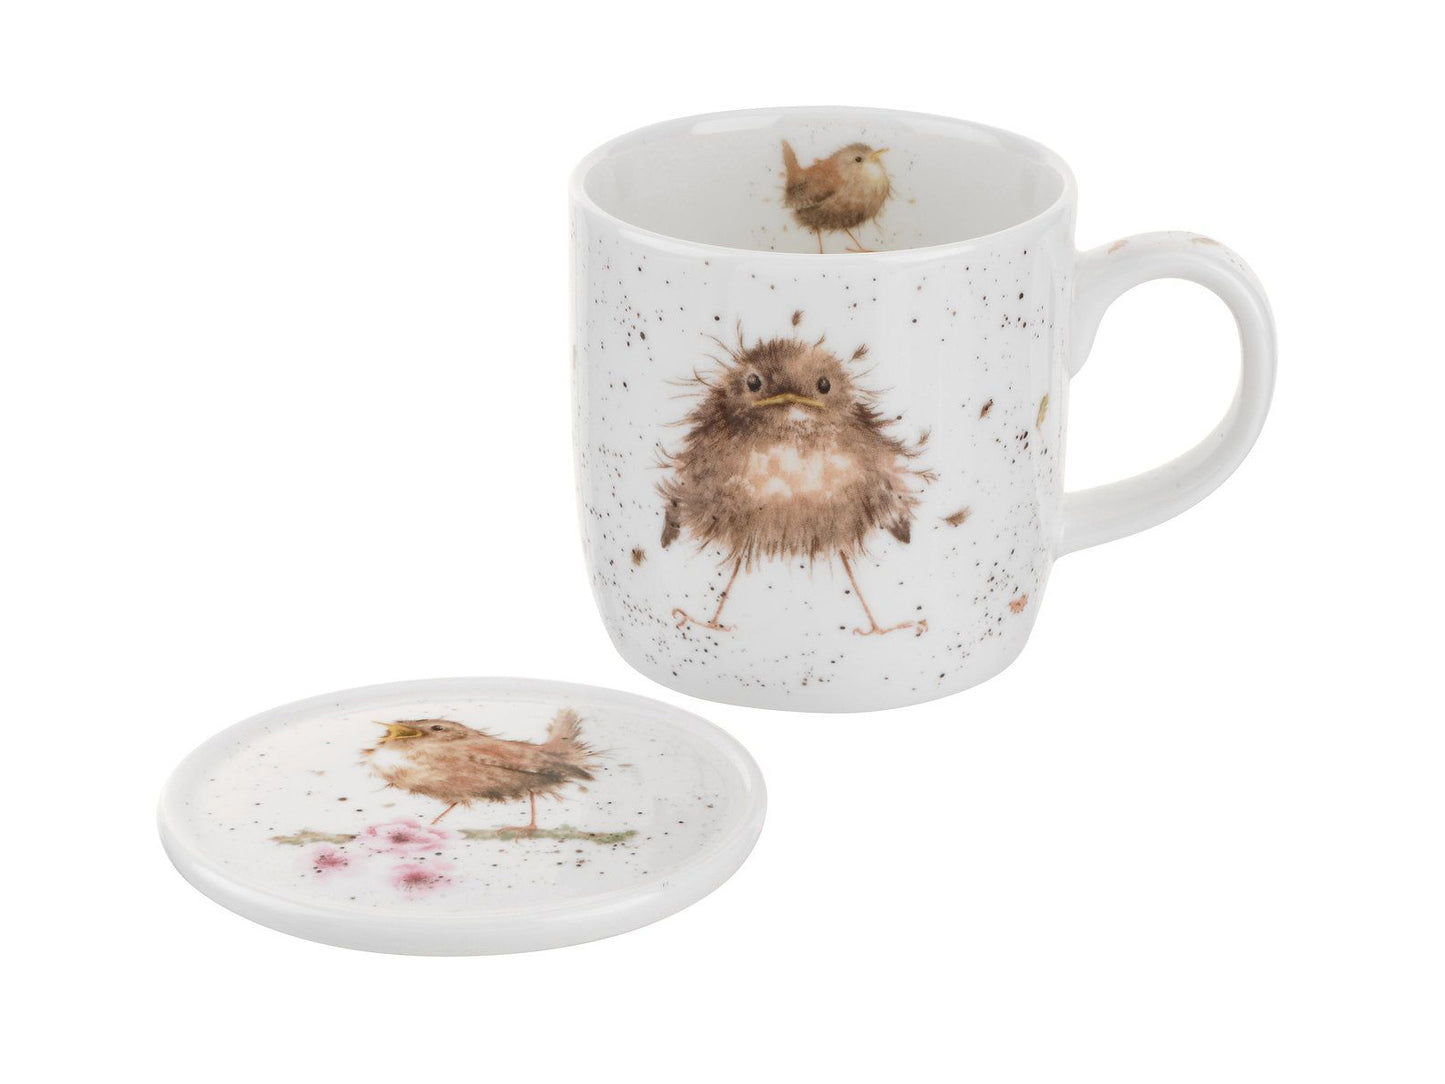 A white china mug and coaster set with wren designs on them in a watercolour style